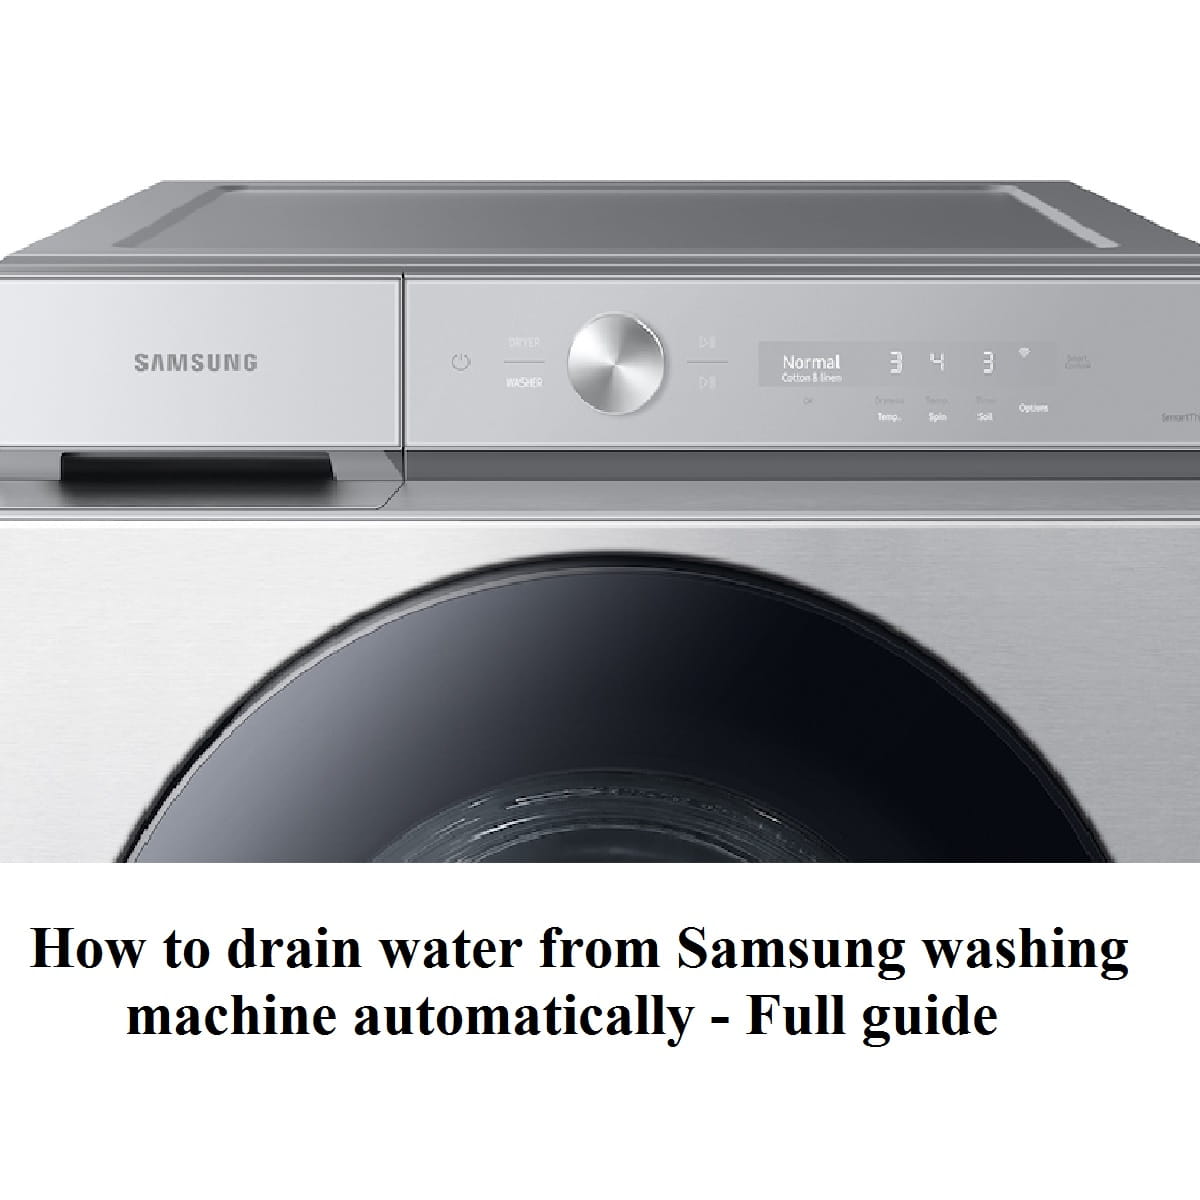 How to drain water from Samsung washing machine automatically